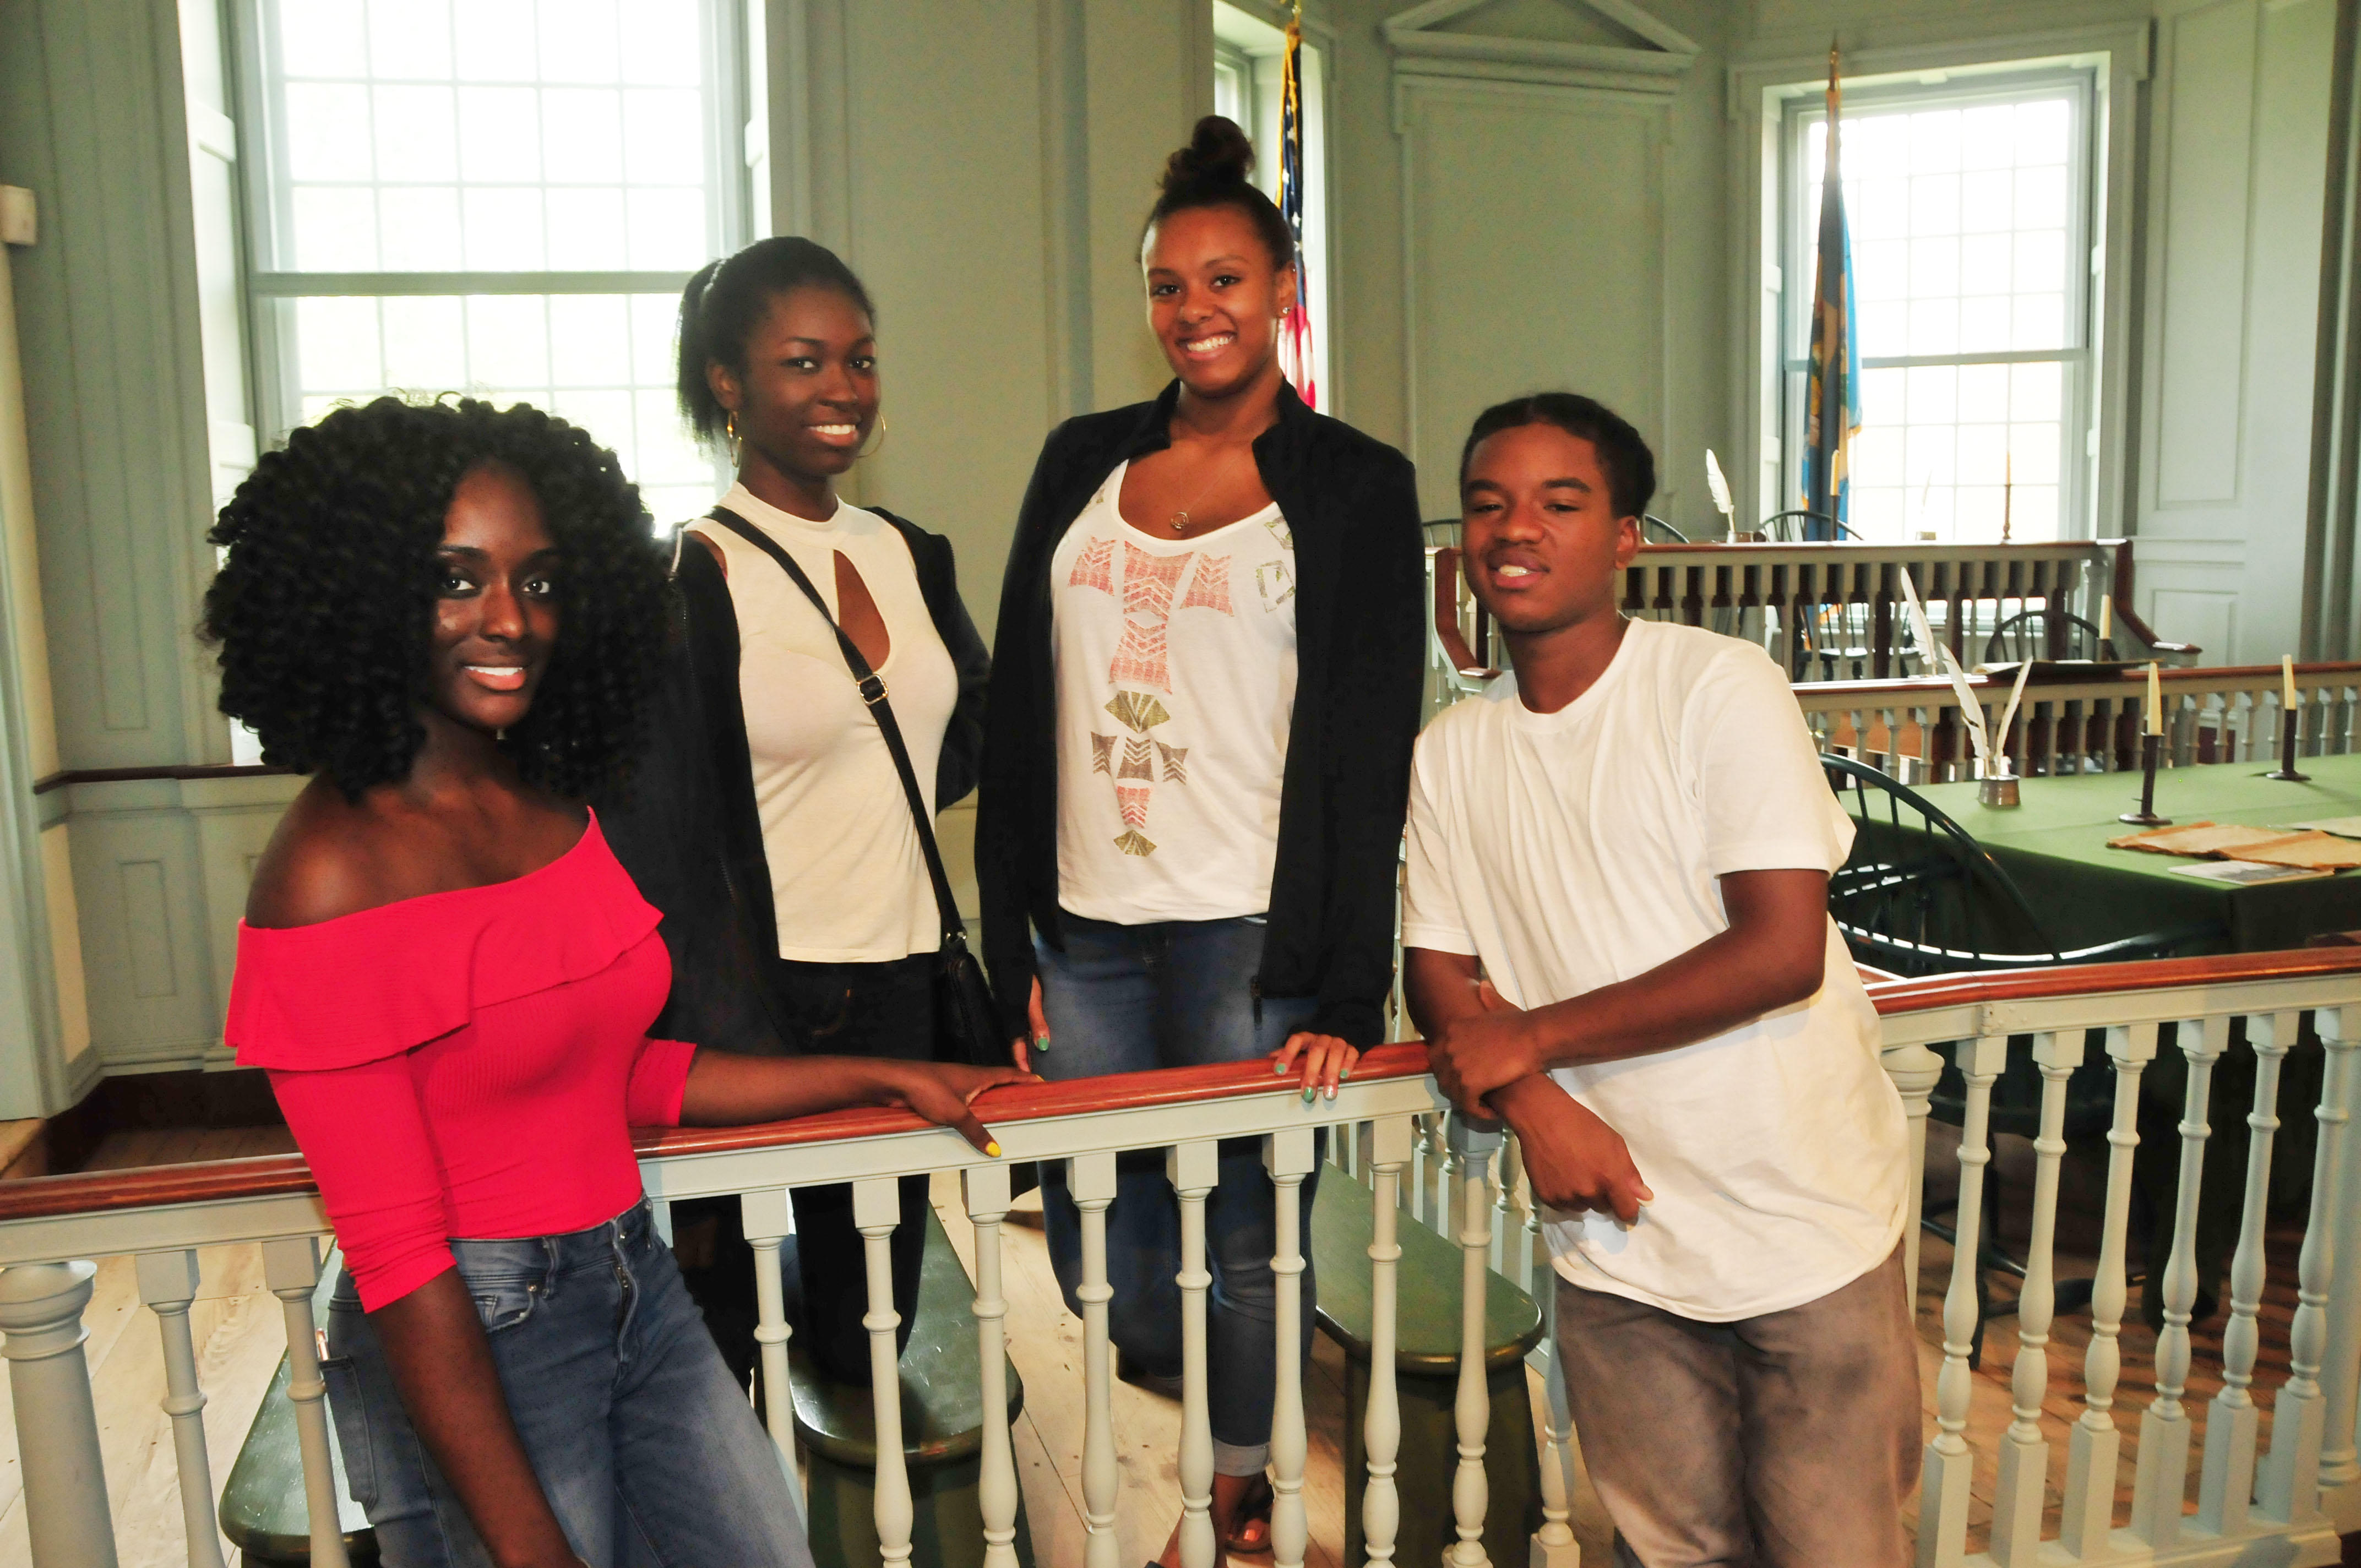 (L-r) Lauryn Turnage, Kiana Ross, Sydnee Bryant and Christian Chapman gave presentations at the Old Sttate House